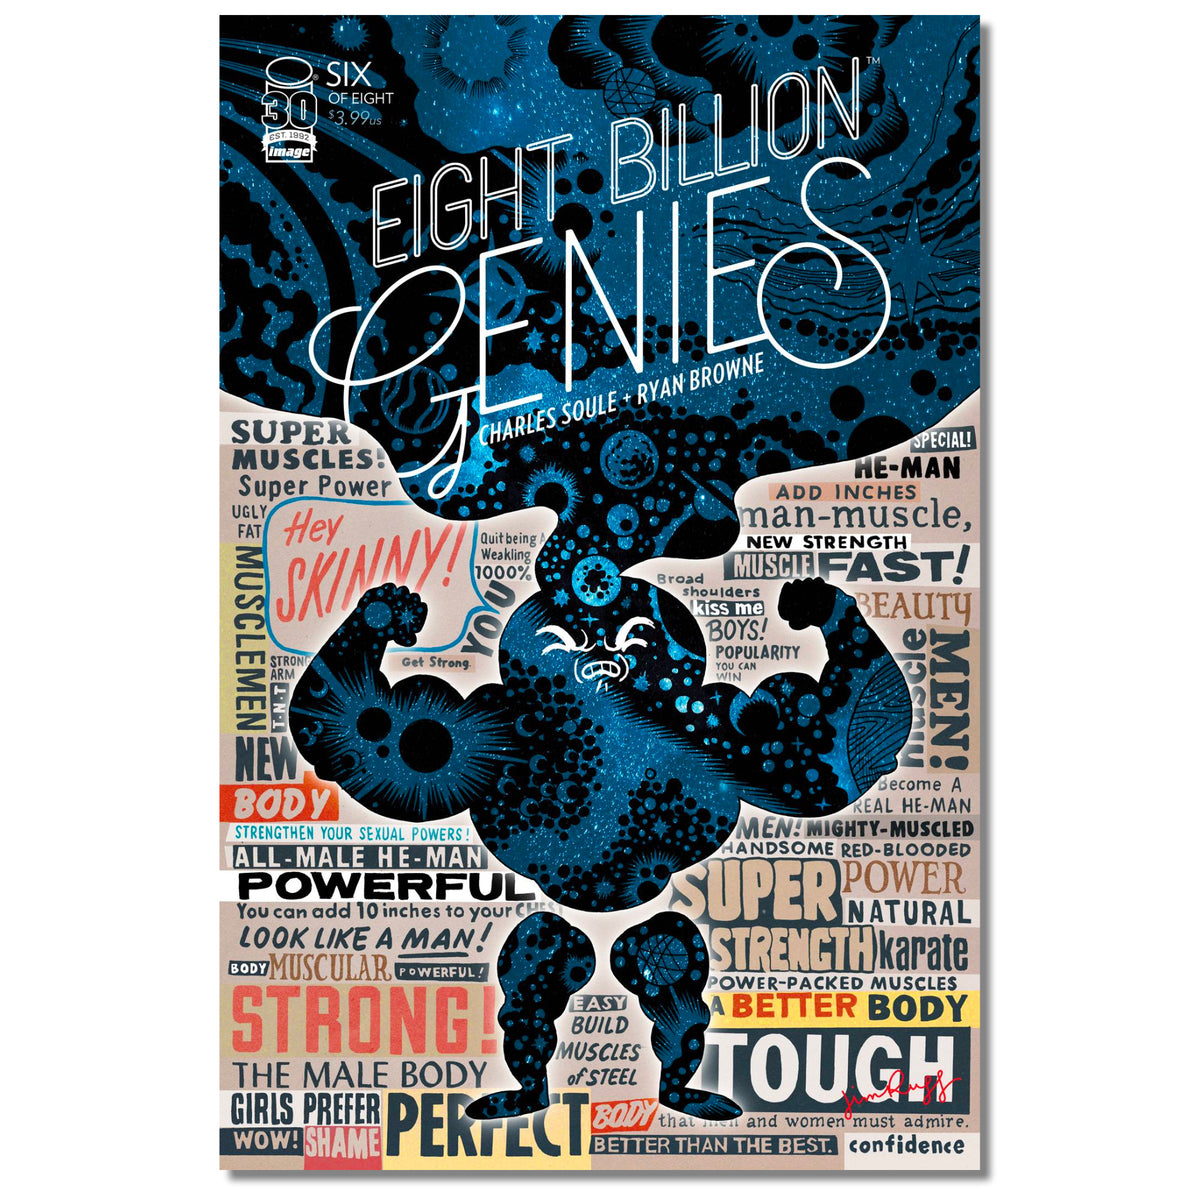 Eight Billion Genies #6 (of 8) Cover B Rugg (MR) FINALSALE